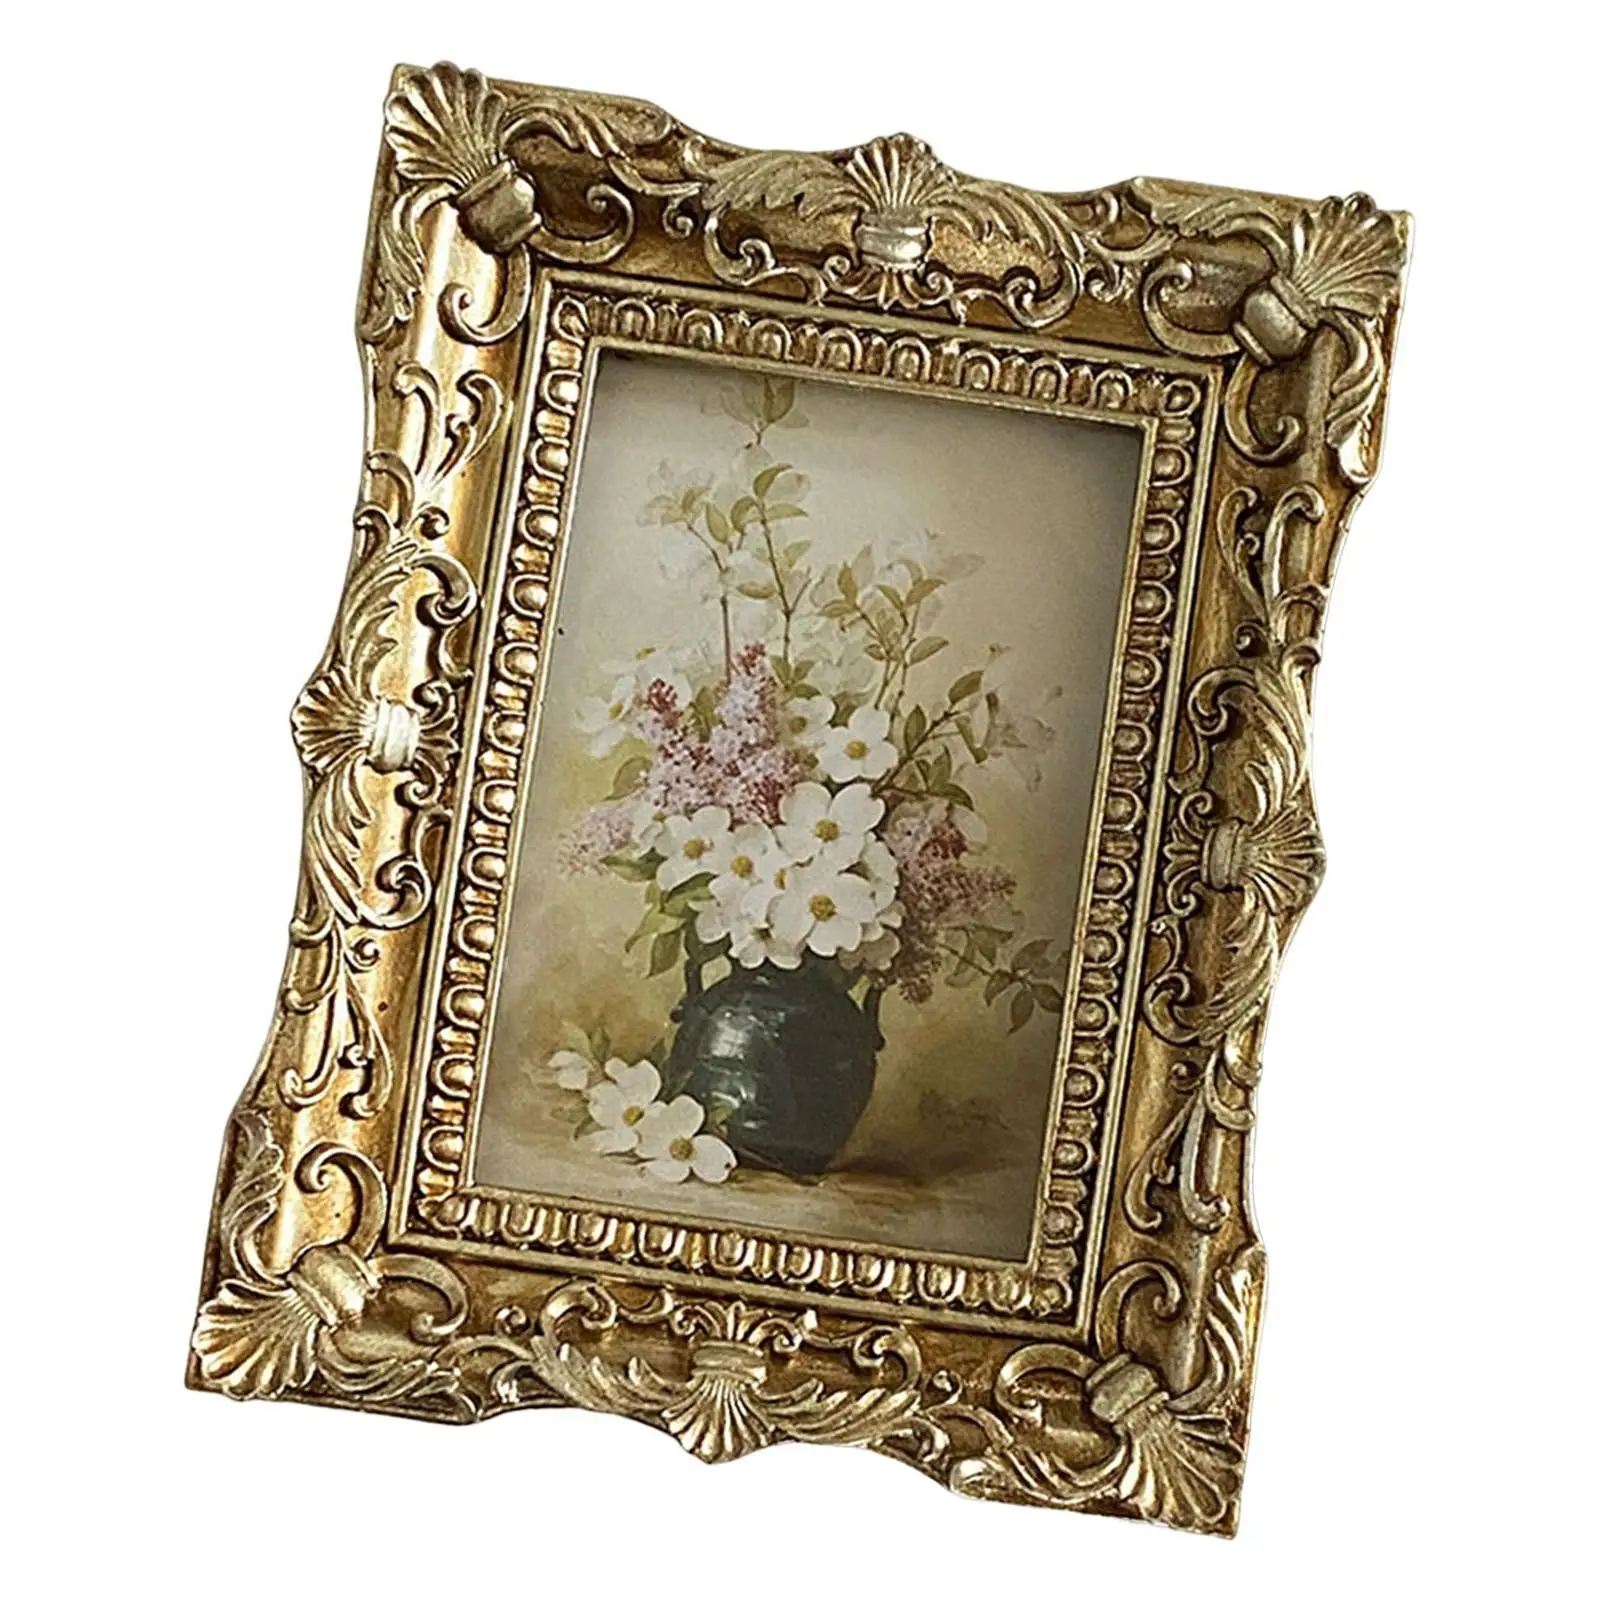 Retro Style Photo Frame Picture Display Holder Resin Picture Frame Tabletop Wall Hanging for Hallway Decoration Holiday Gift